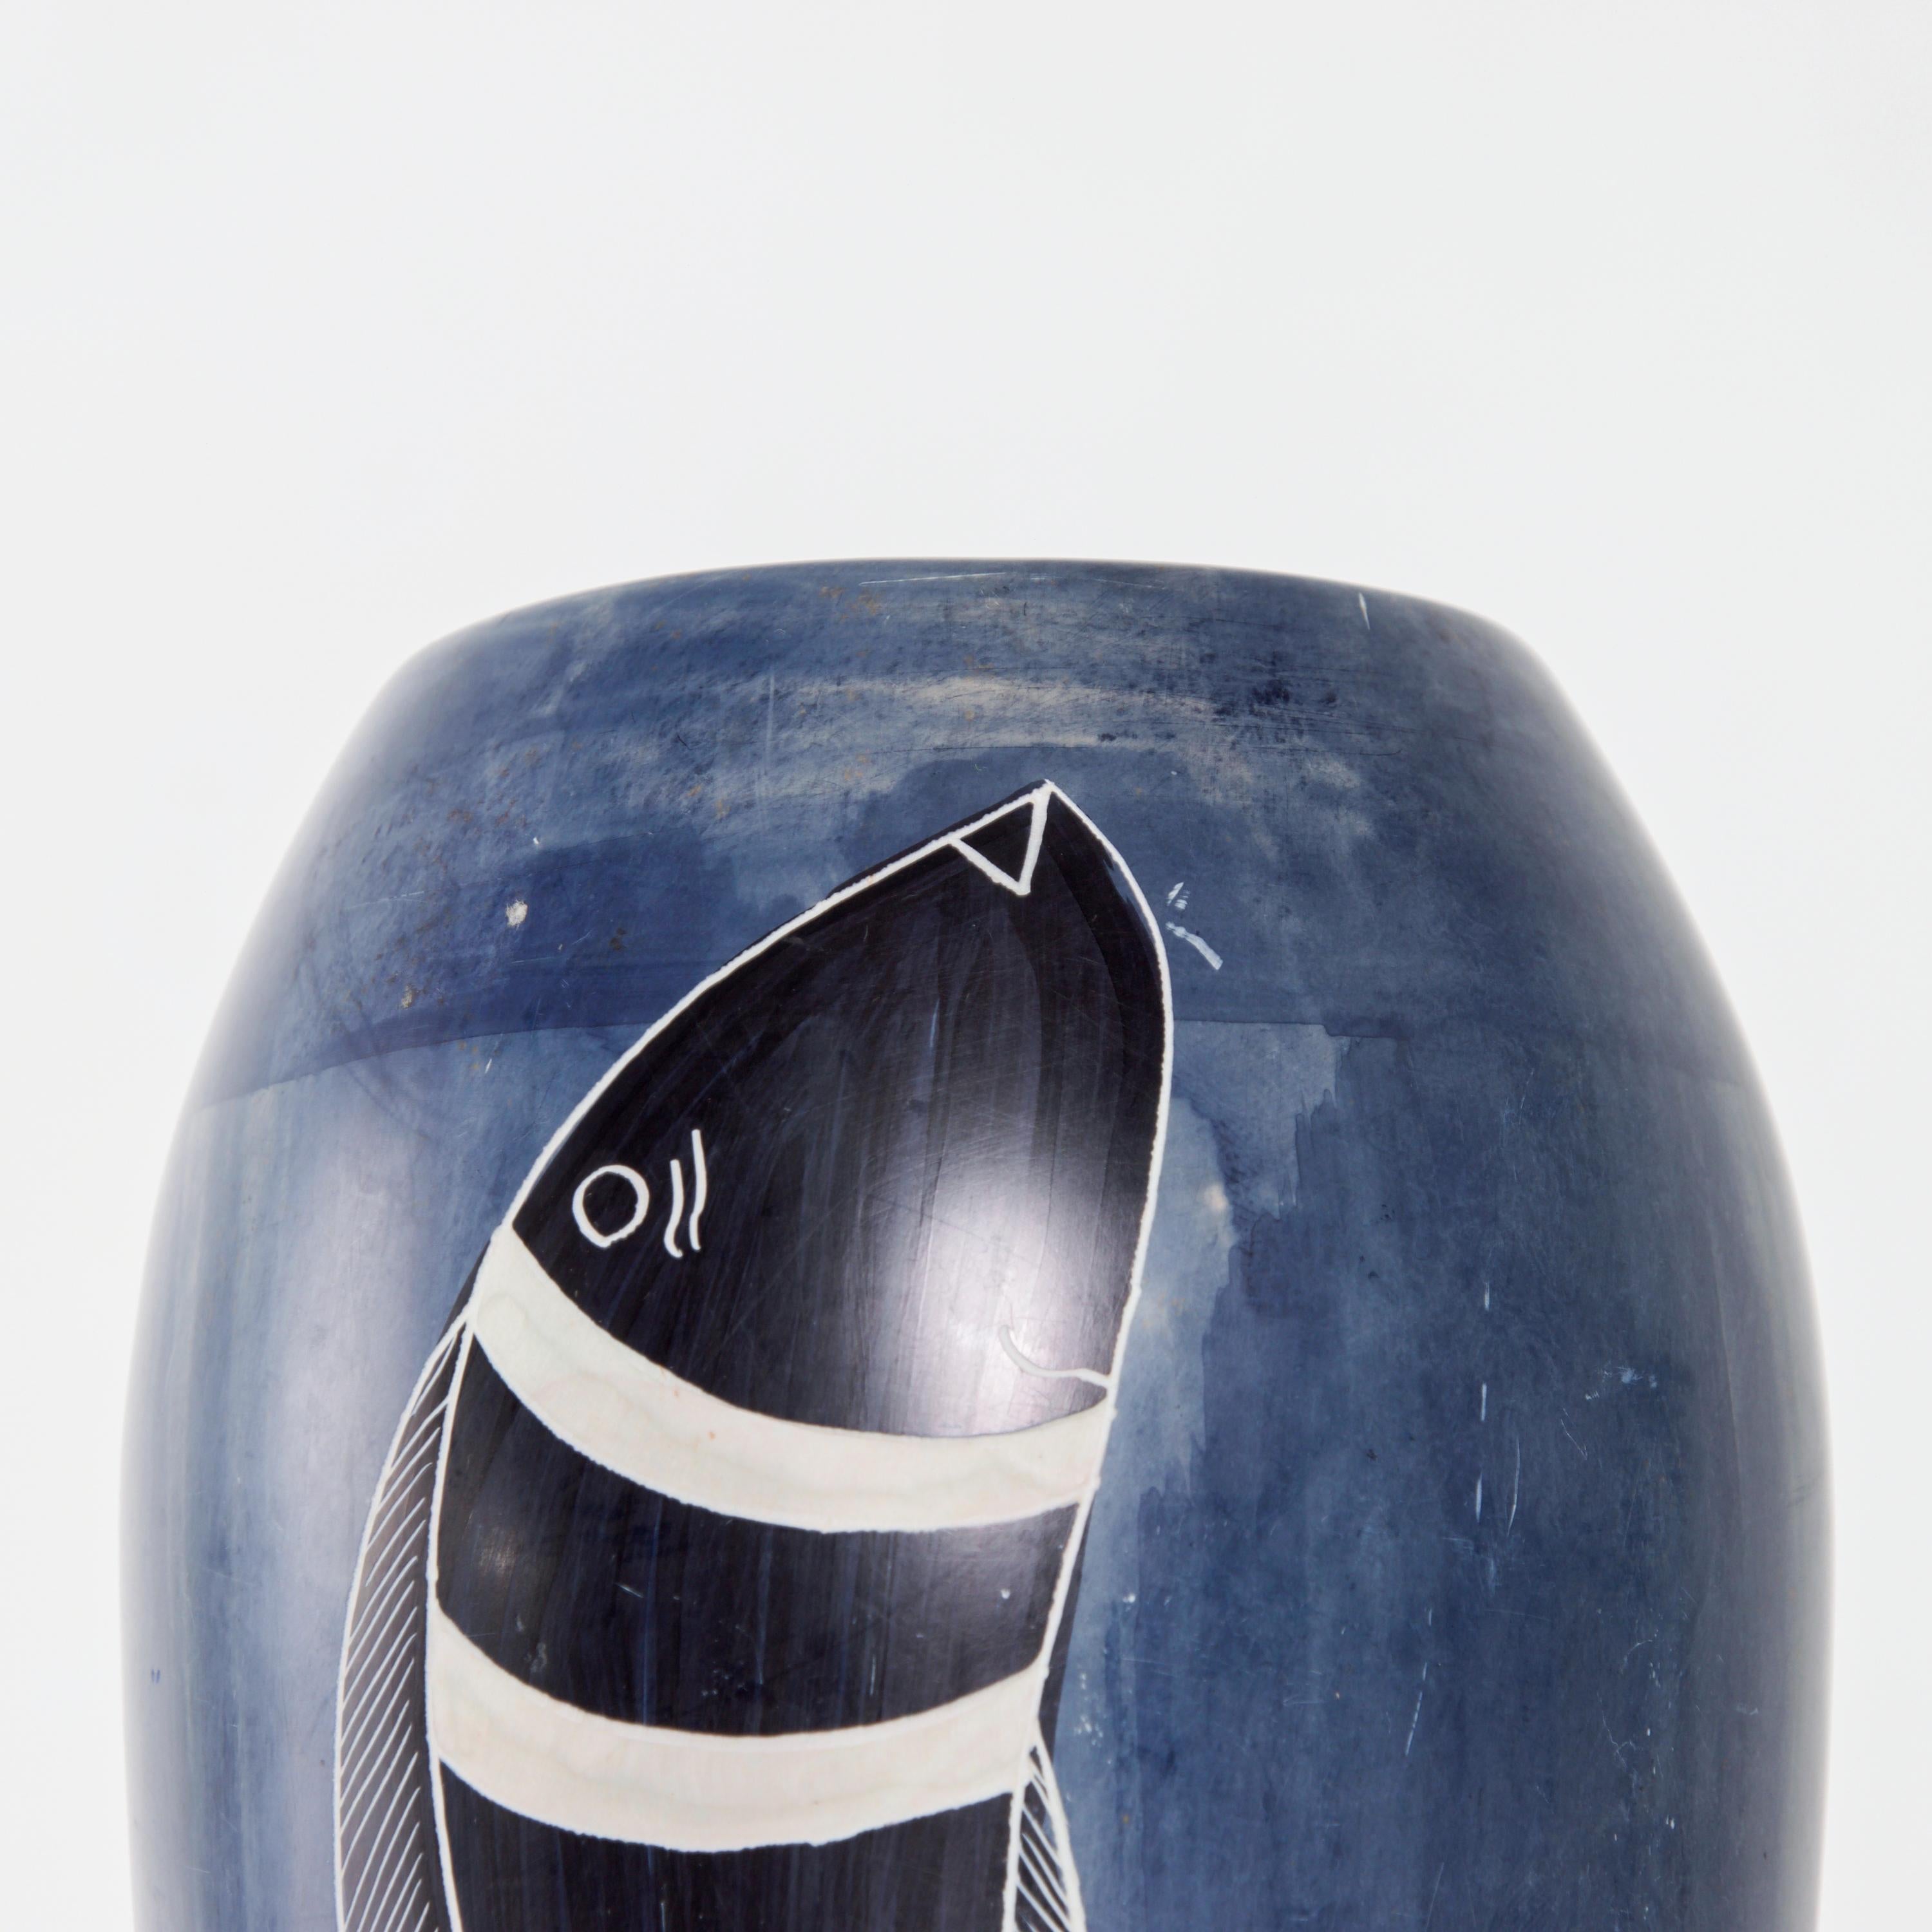 Italy Domina blue wash color fish vase with black and white striped fish of Arts & Crafts style and in the manner of Gio Ponti for Richard Ginori designs.
No signature apparent.
Measures: 10.25 height x 4.13 in diameter
Smooth surface. Sun faded